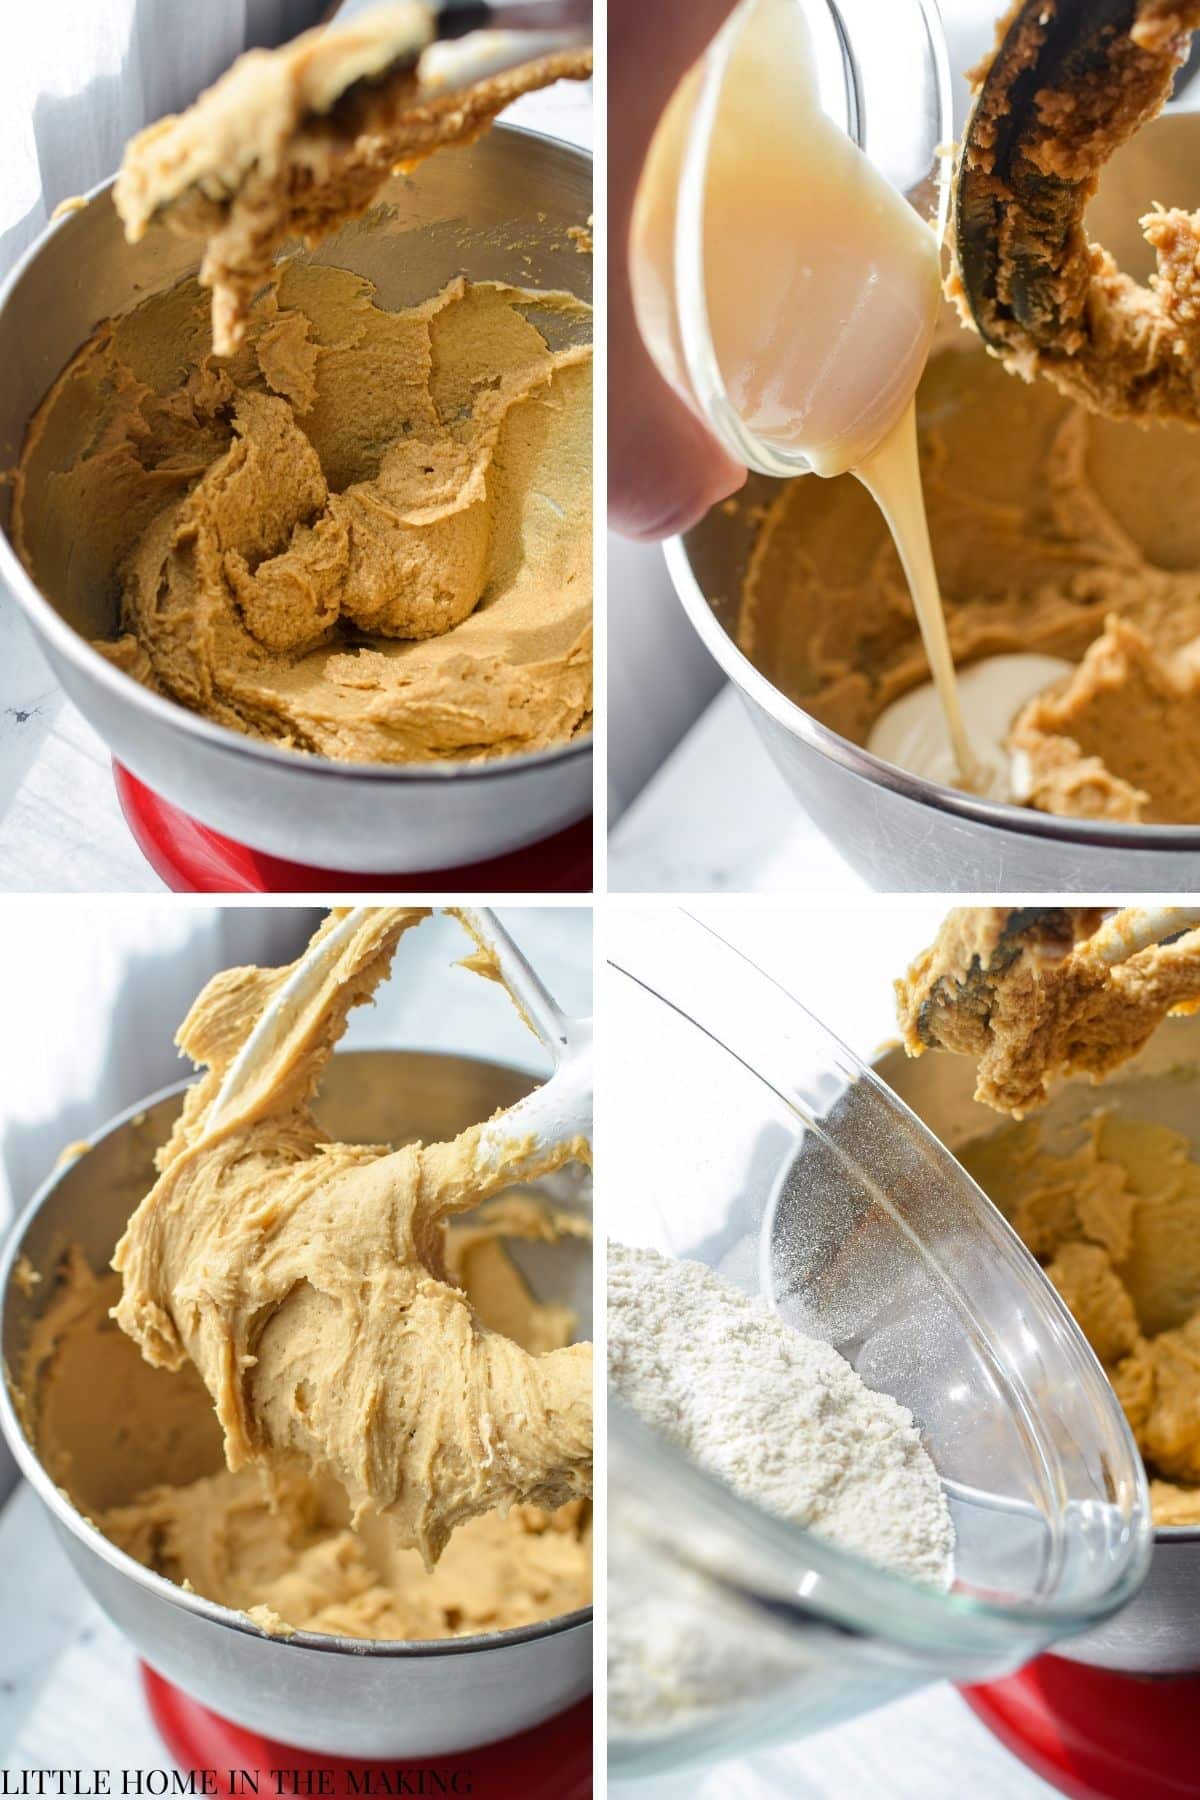 Mixing up cooking batter in a stand mixer.